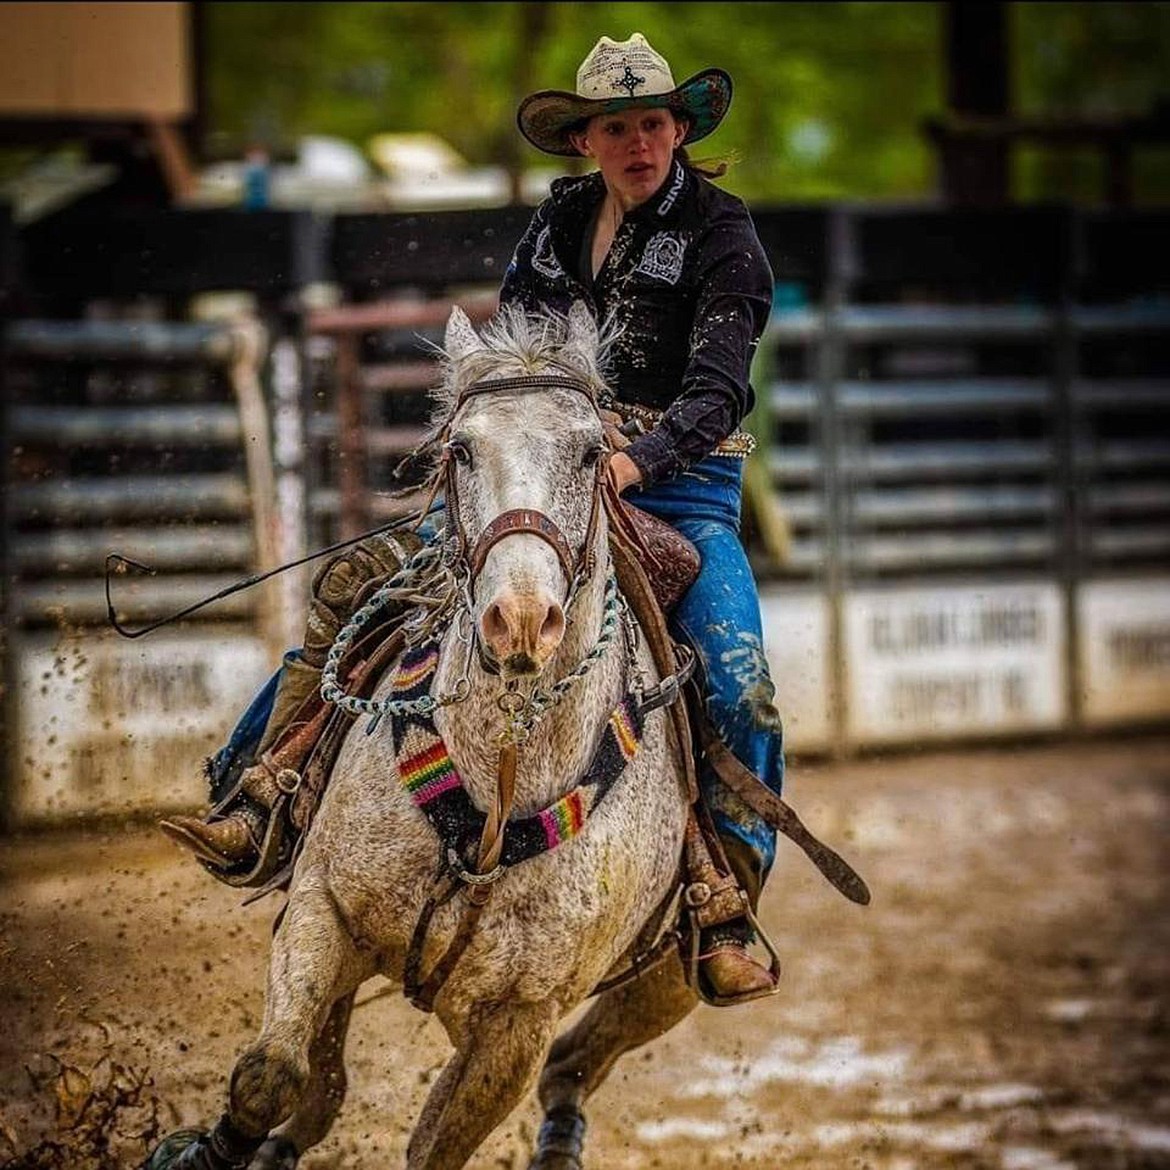 Charlo high schooler Morgan Shepard rides her horse Chilly in a rodeo. Morgan recently qualified for the 2020 National High School Finals Rodeo in the pole bending event. (Photo provided by Traci Shepard)